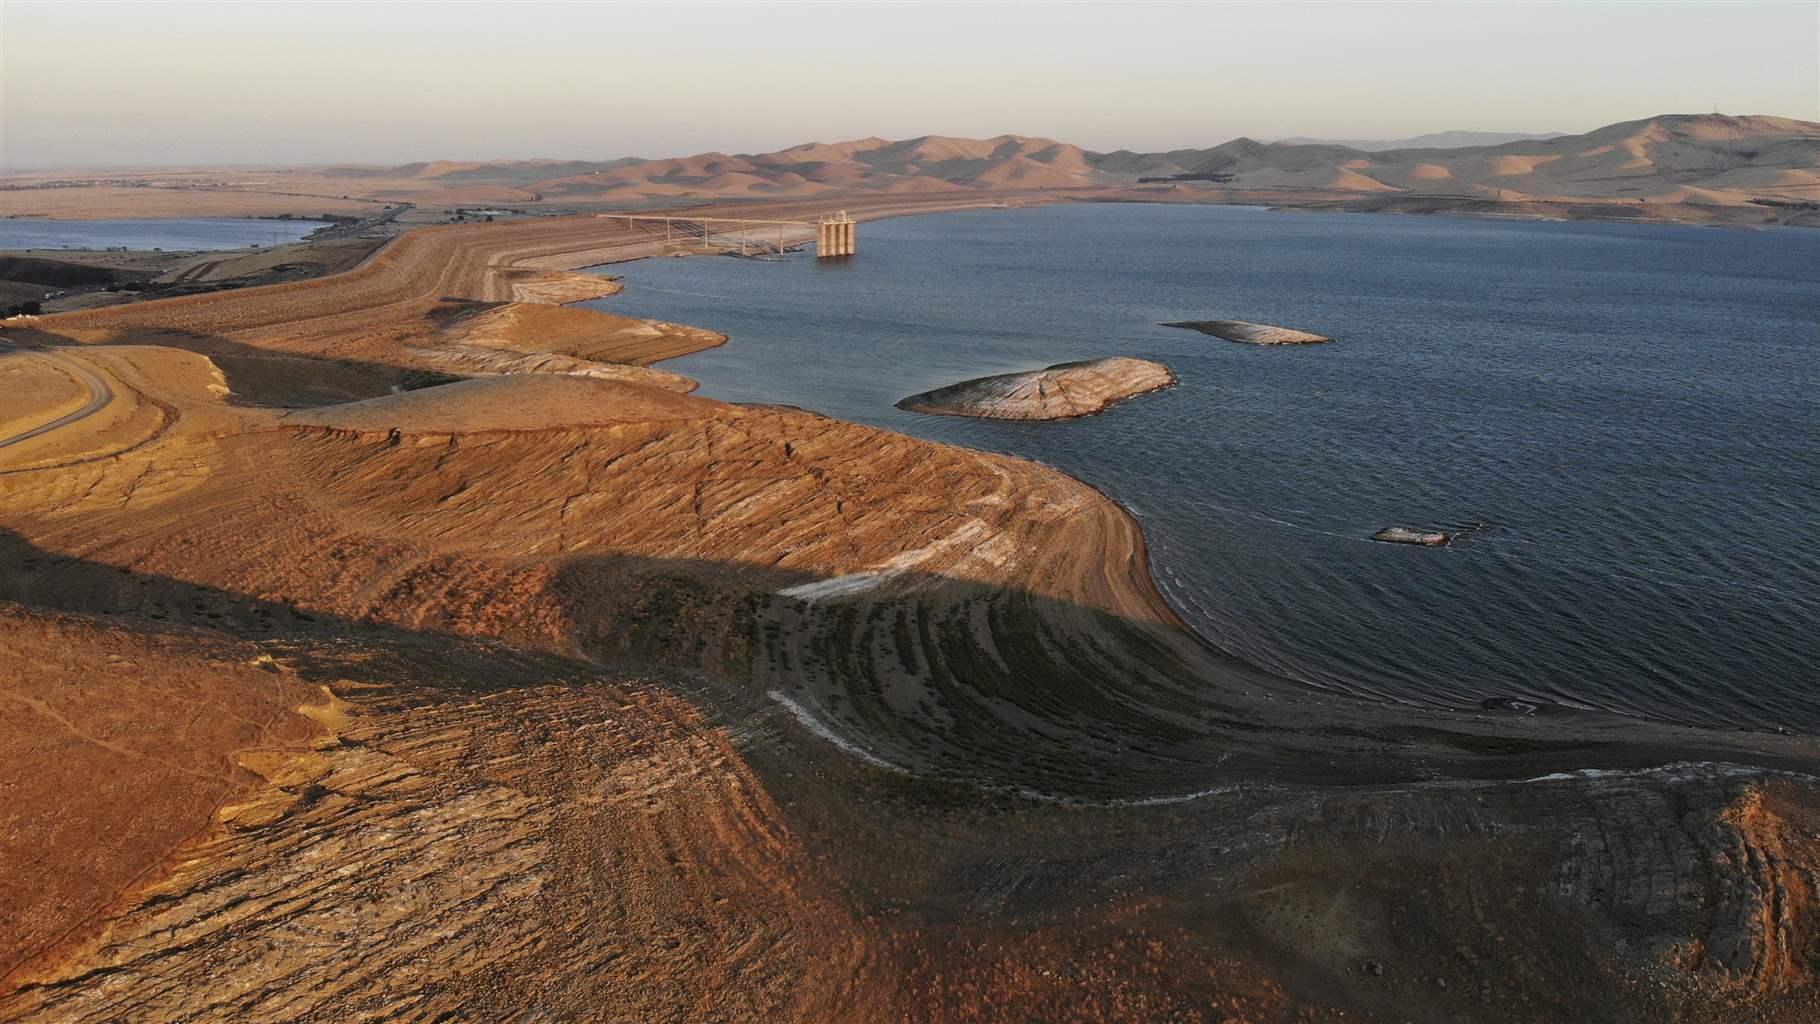 Water levels are low at San Luis Reservoir, which stores irrigation water for San Joaquin Valley farms, in Gustine, Calif., Sept. 14, 2022. As climate change brings hotter temperatures and more severe droughts, cities and states around the world are facing water shortages as lakes and rivers dry up.  (AP Photo/Terry Chea)